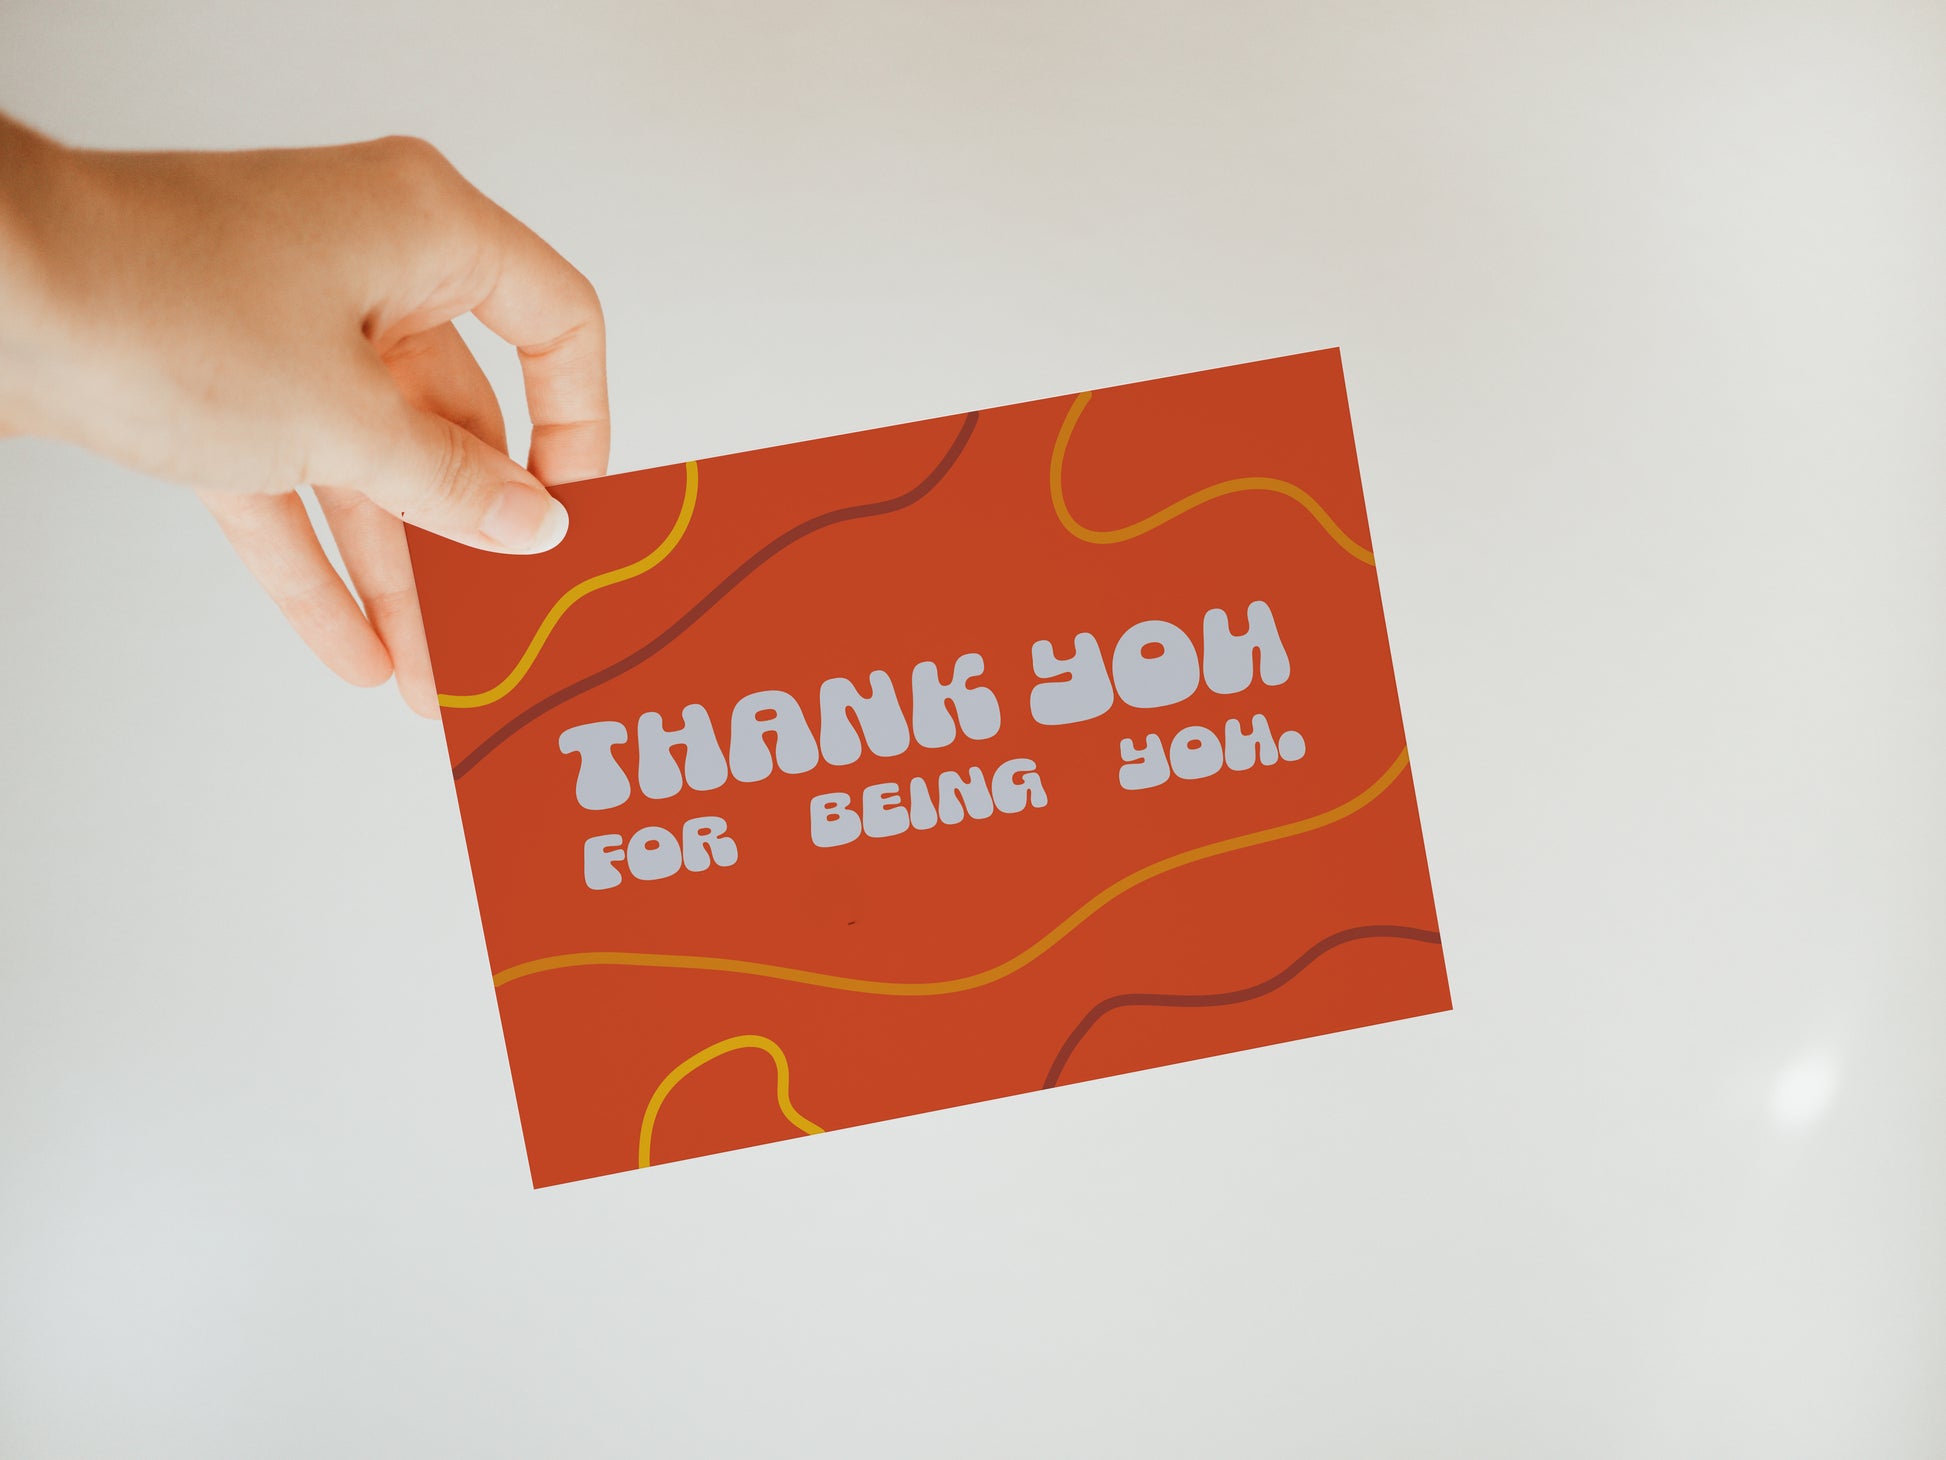 hand holding a red greeting card that says "thank you for being you" in white bubble letters with a simple wavy line design in the background in muted yellows and dark reds